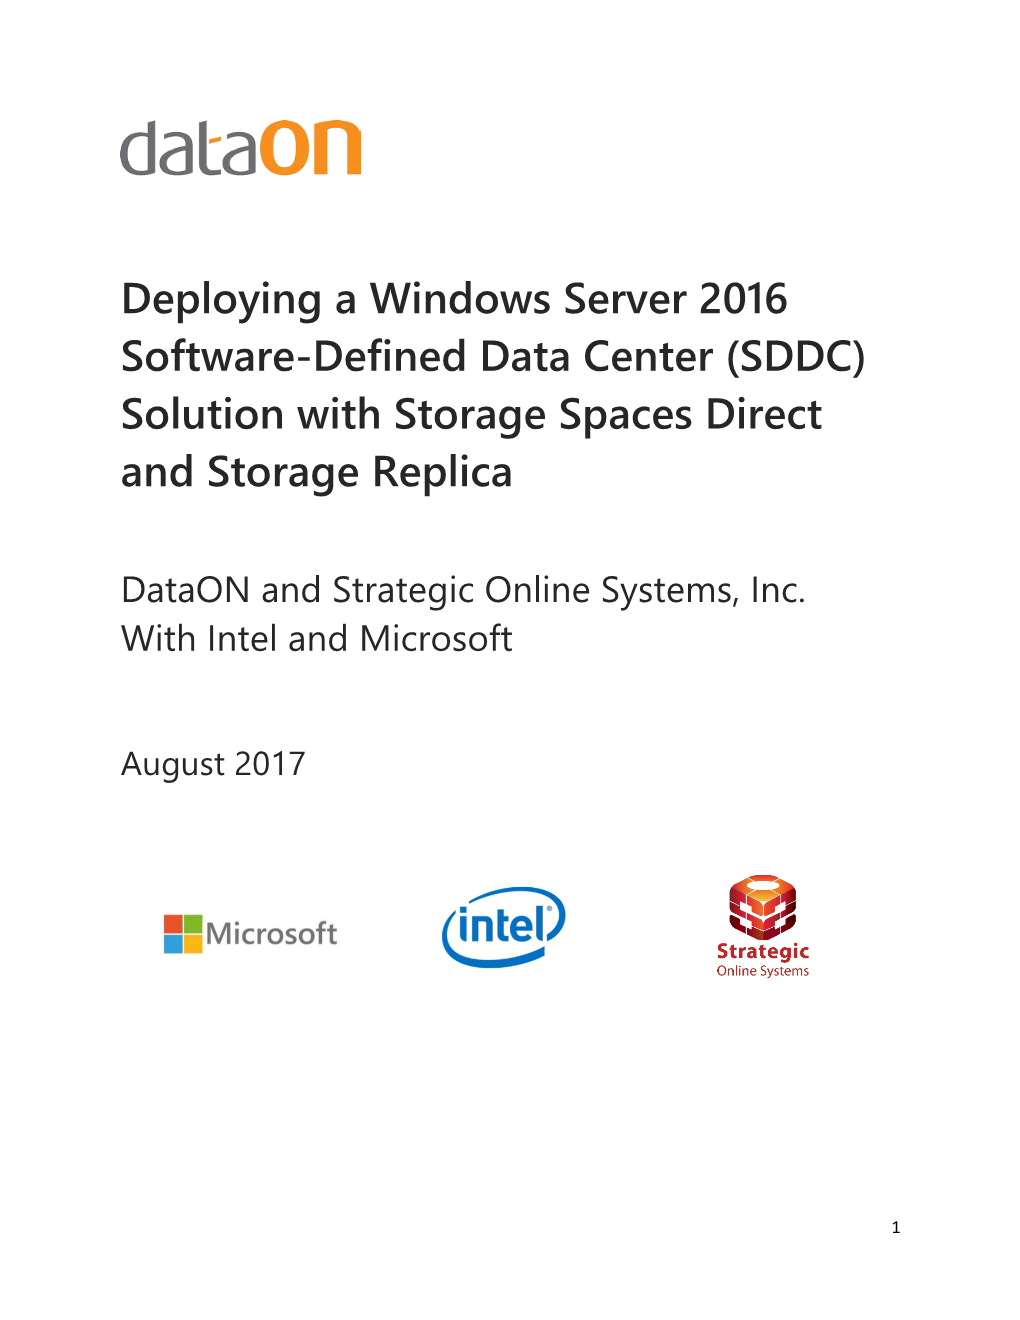 Deploying a Windows Server 2016 Software-Defined Data Center (SDDC) Solution with Storage Spaces Direct and Storage Replica